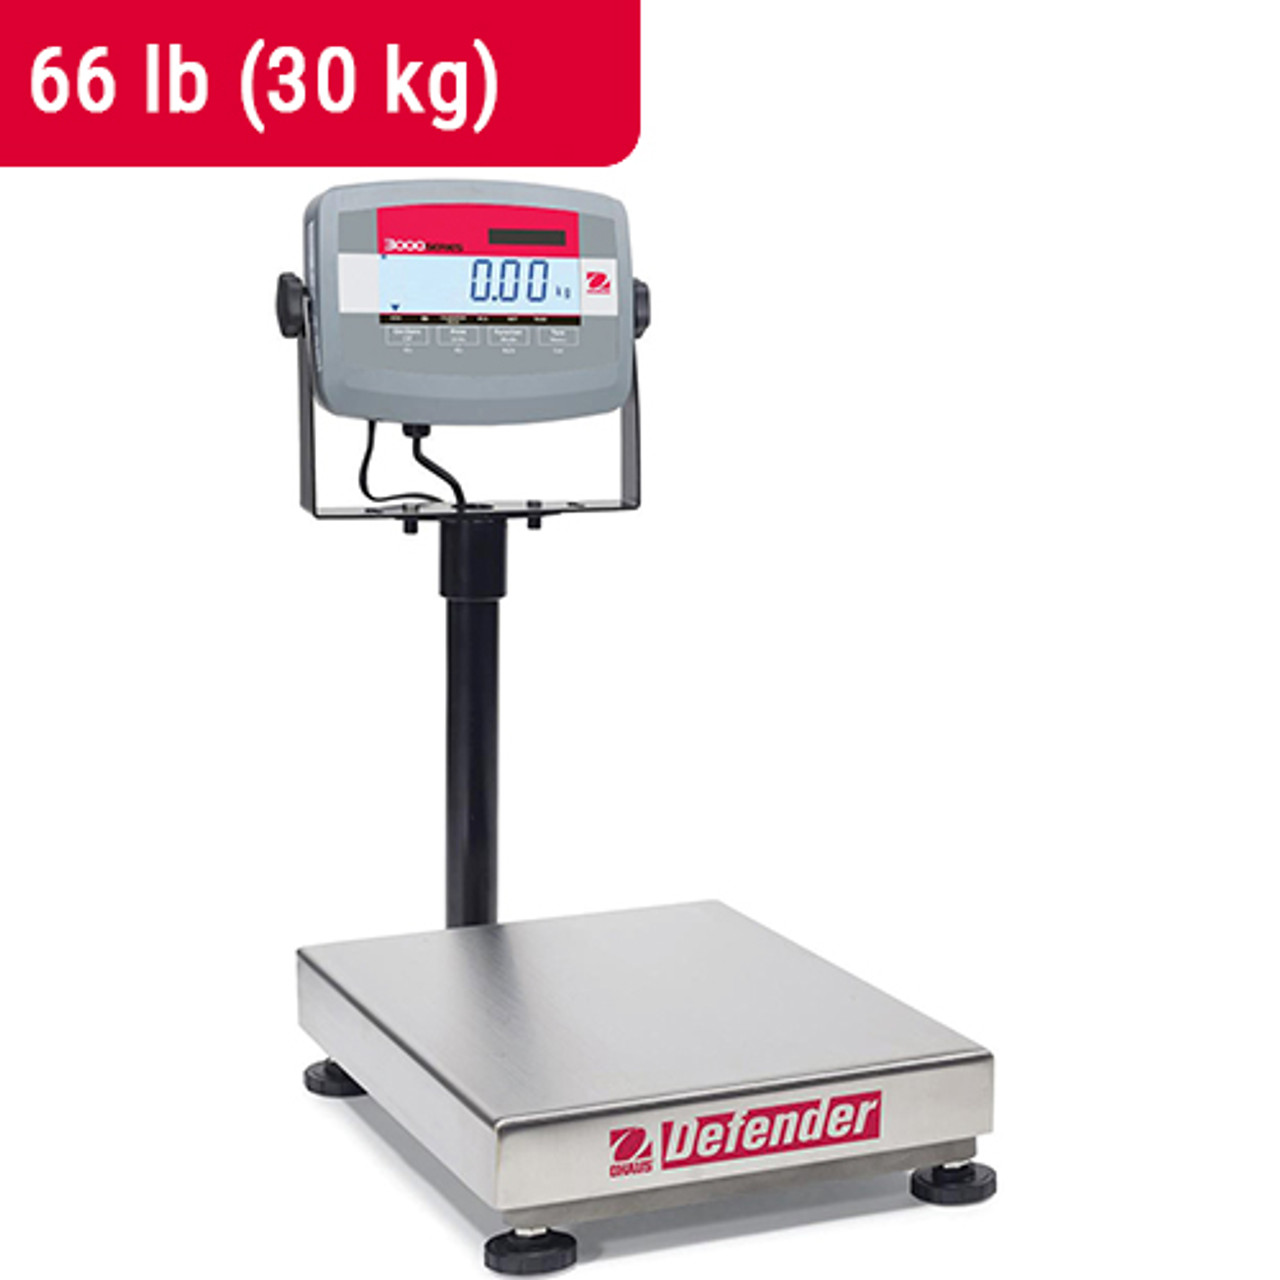 Ohaus Defender 3000 D31P300BX Bench Scales, 83998116, 660 lbs. x 0.1 lb.,  650 mm x 500 mm New Laboratory Setup Savings - up to 40%, Magnetic Stirrer,  Vortex Mixer, Sample Prep, Centrifuge